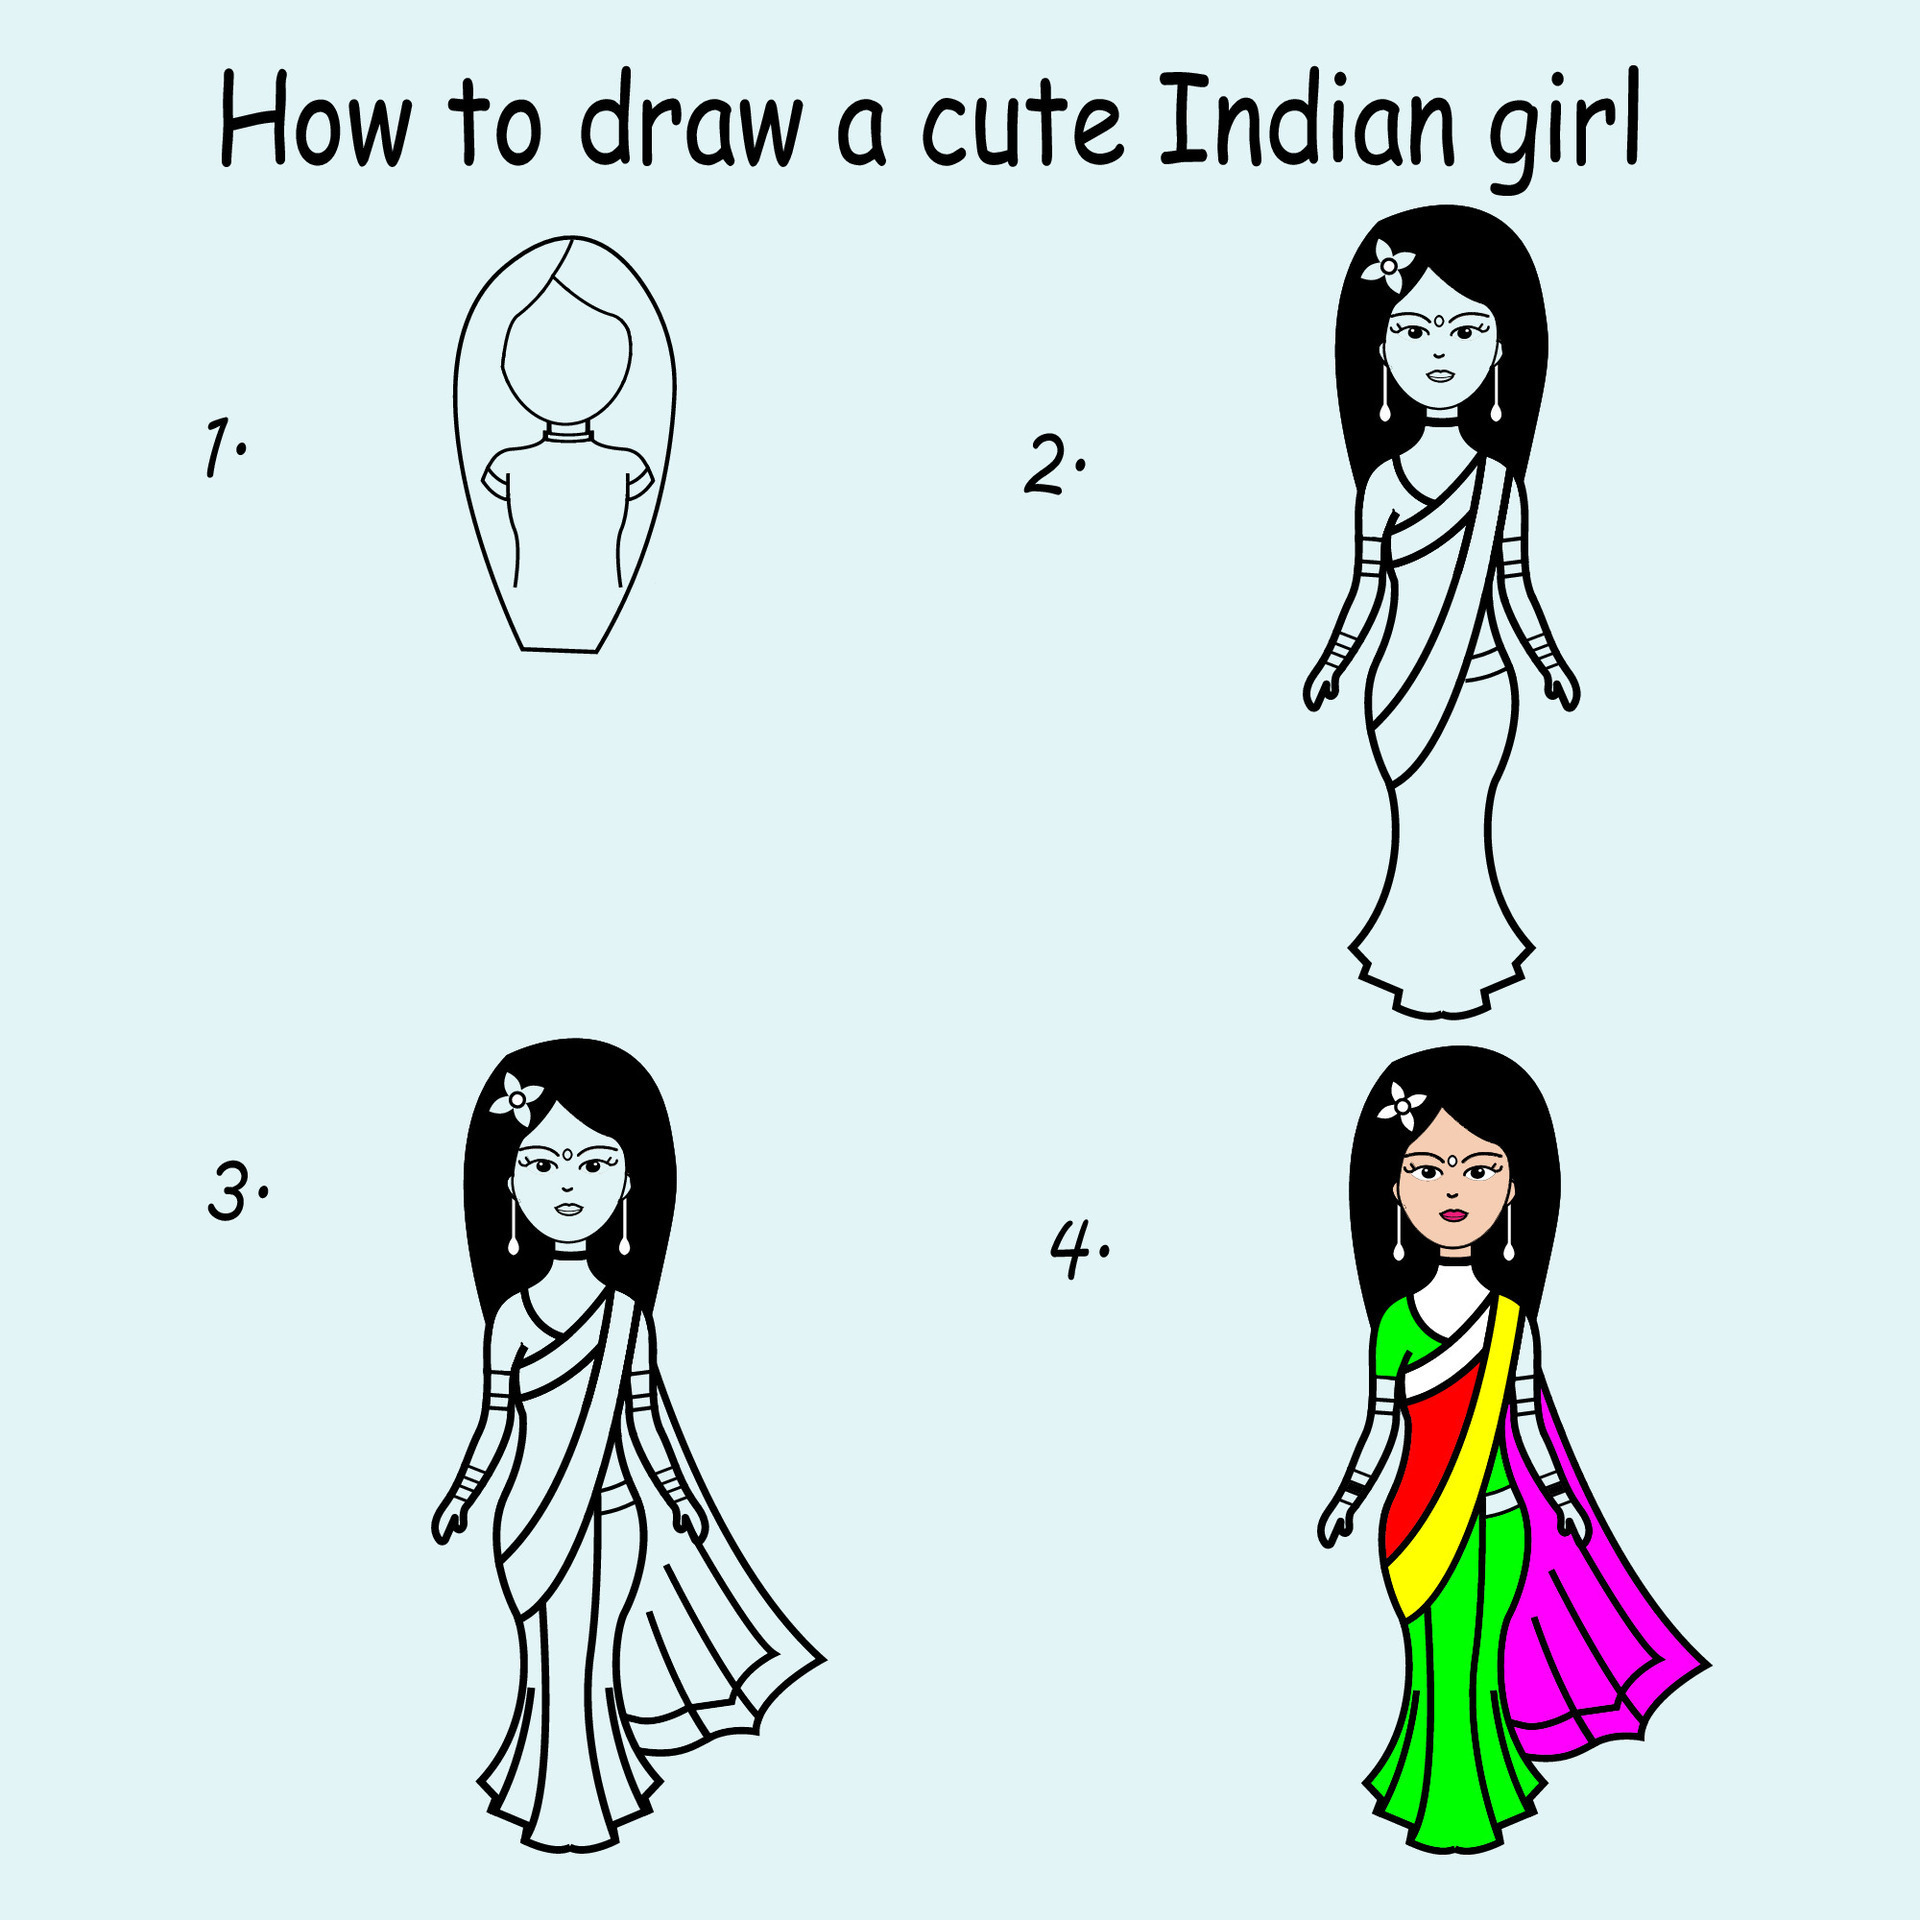 How To Draw A Cute Girl - Easy Step By Step Guide For Kids & Beginners-saigonsouth.com.vn